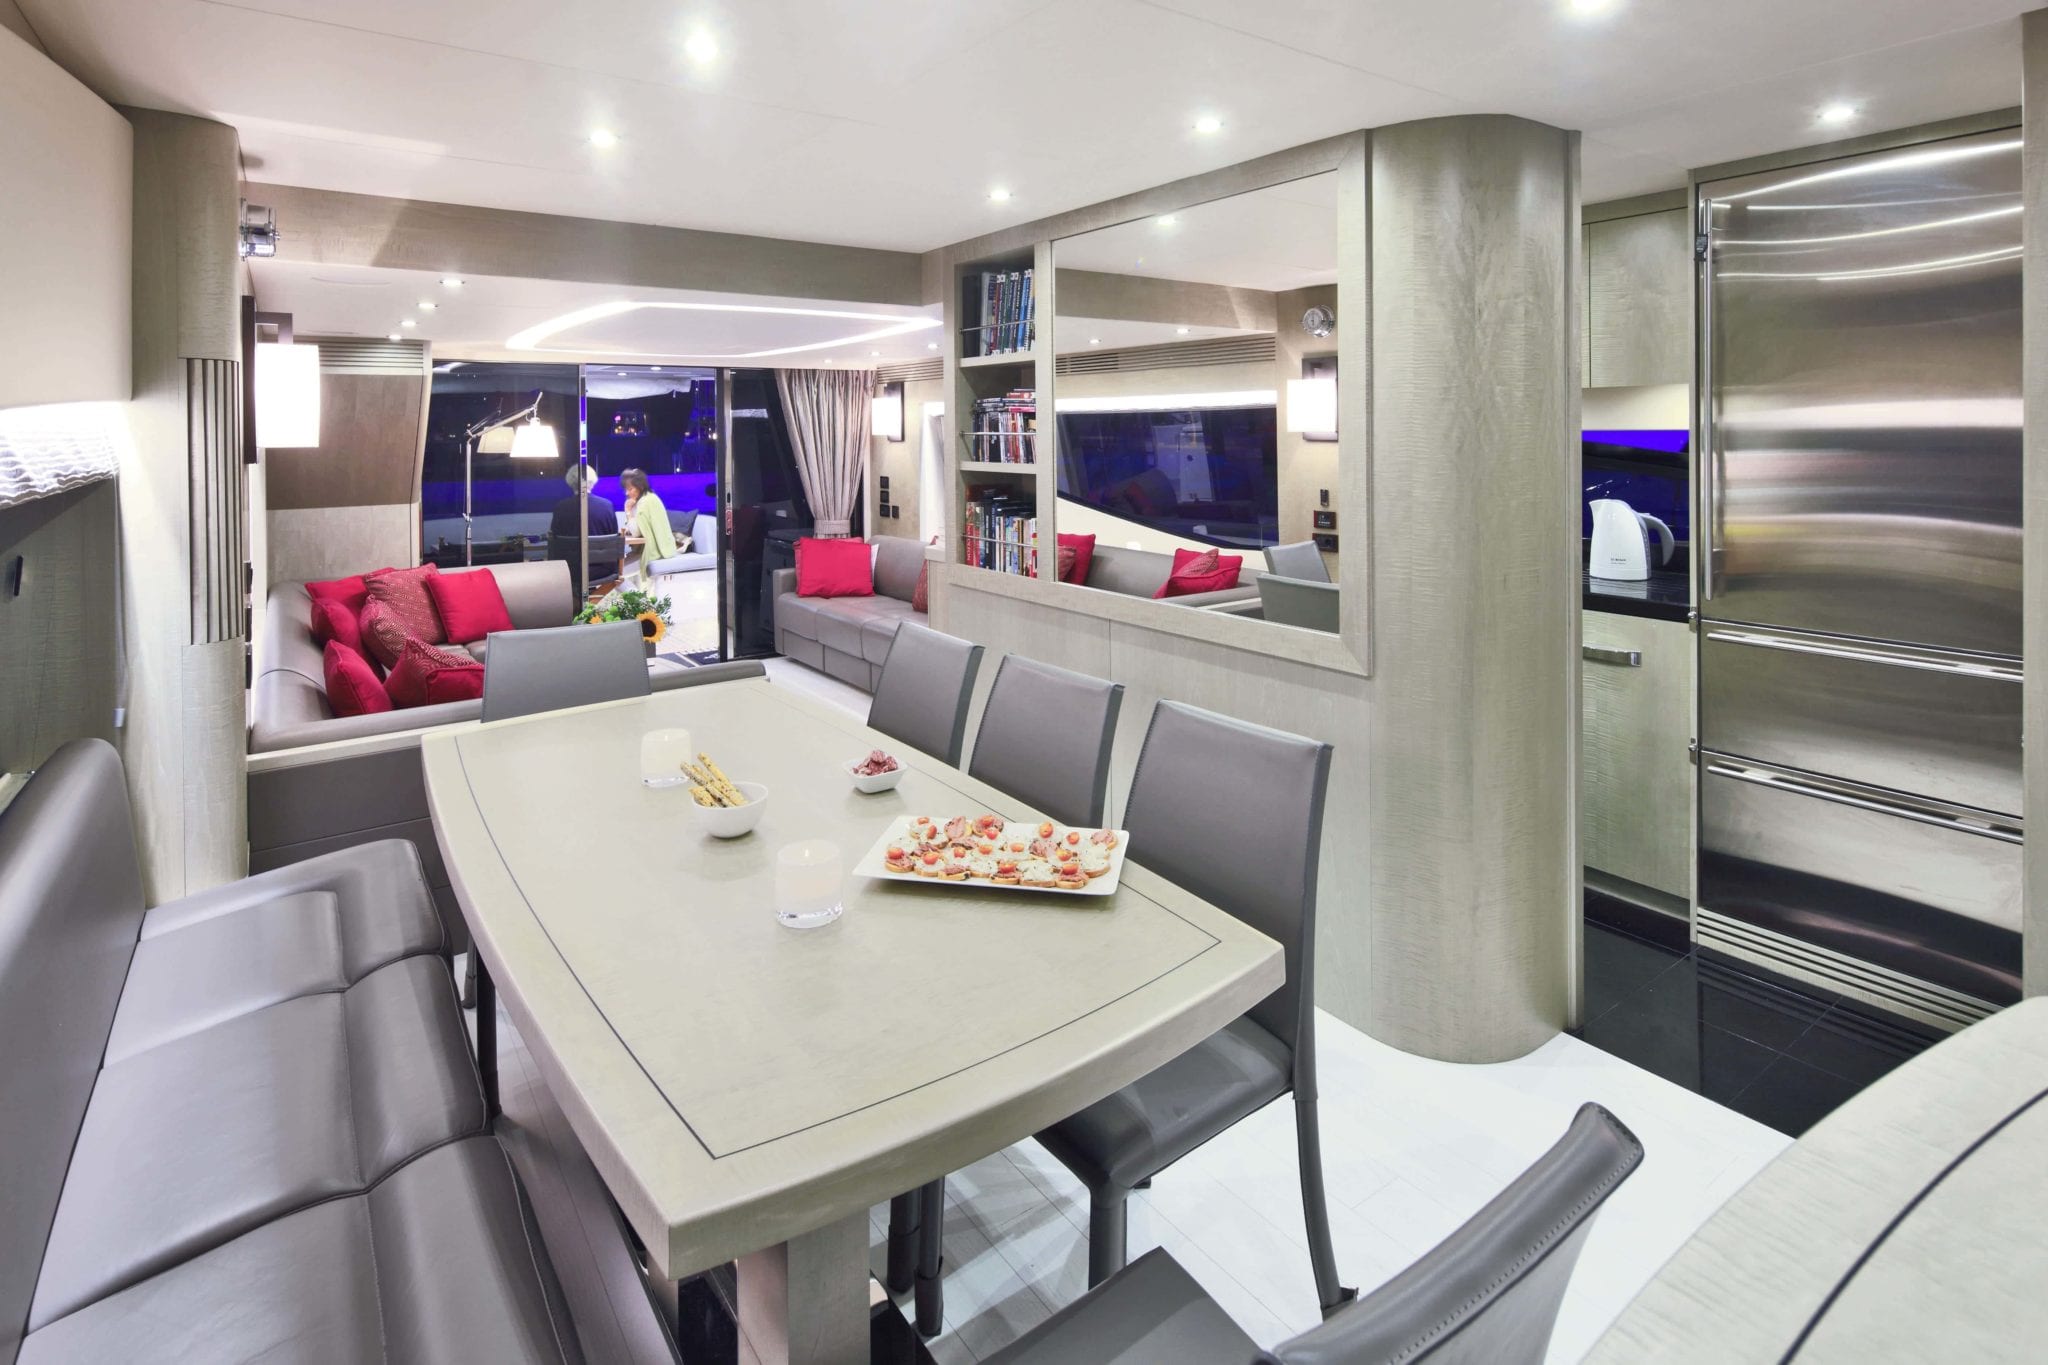 Explore the lounge and kitchen area here onboard the luxury sunseeker yacht.